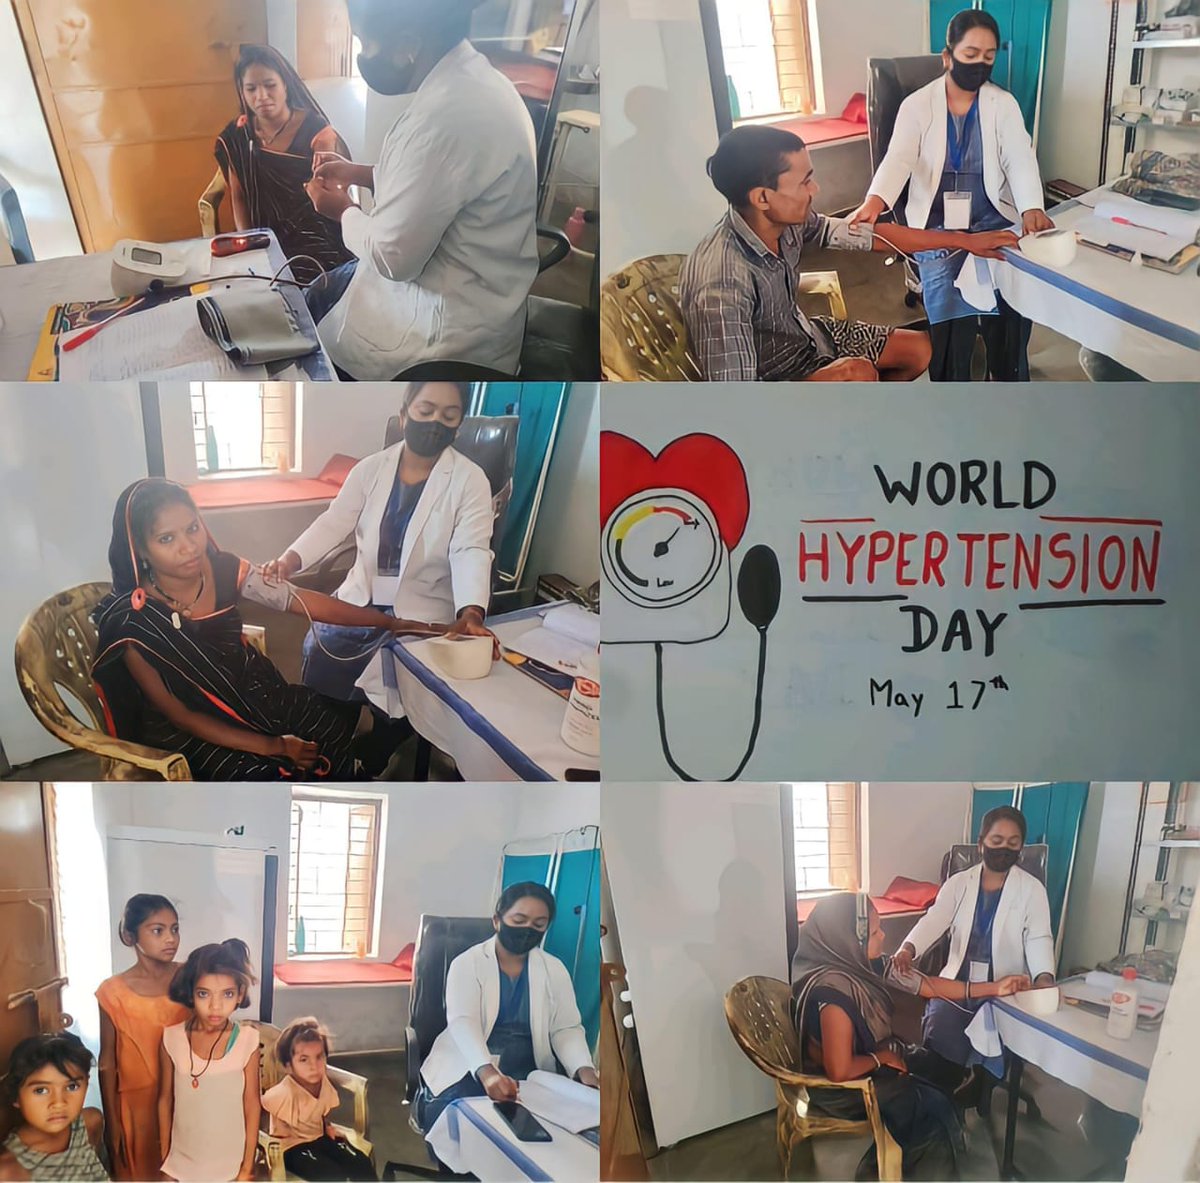 This #WorldHypertensionDay, HWC Baditummi Block, Pushparajgarh, #MP is raising awareness about #hypertension prevention, detection, and control to combat cardiovascular disease. Let's take action for healthier hearts!